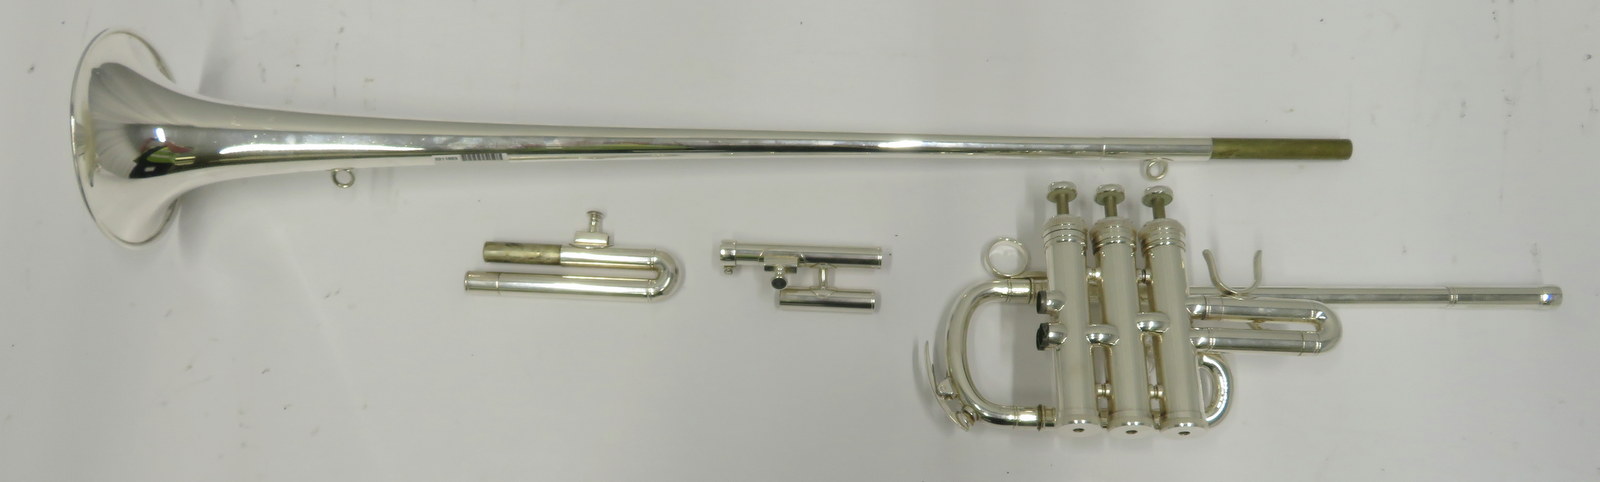 Besson BE706 International fanfare trumpet with case. Serial number: 885996. - Image 3 of 14